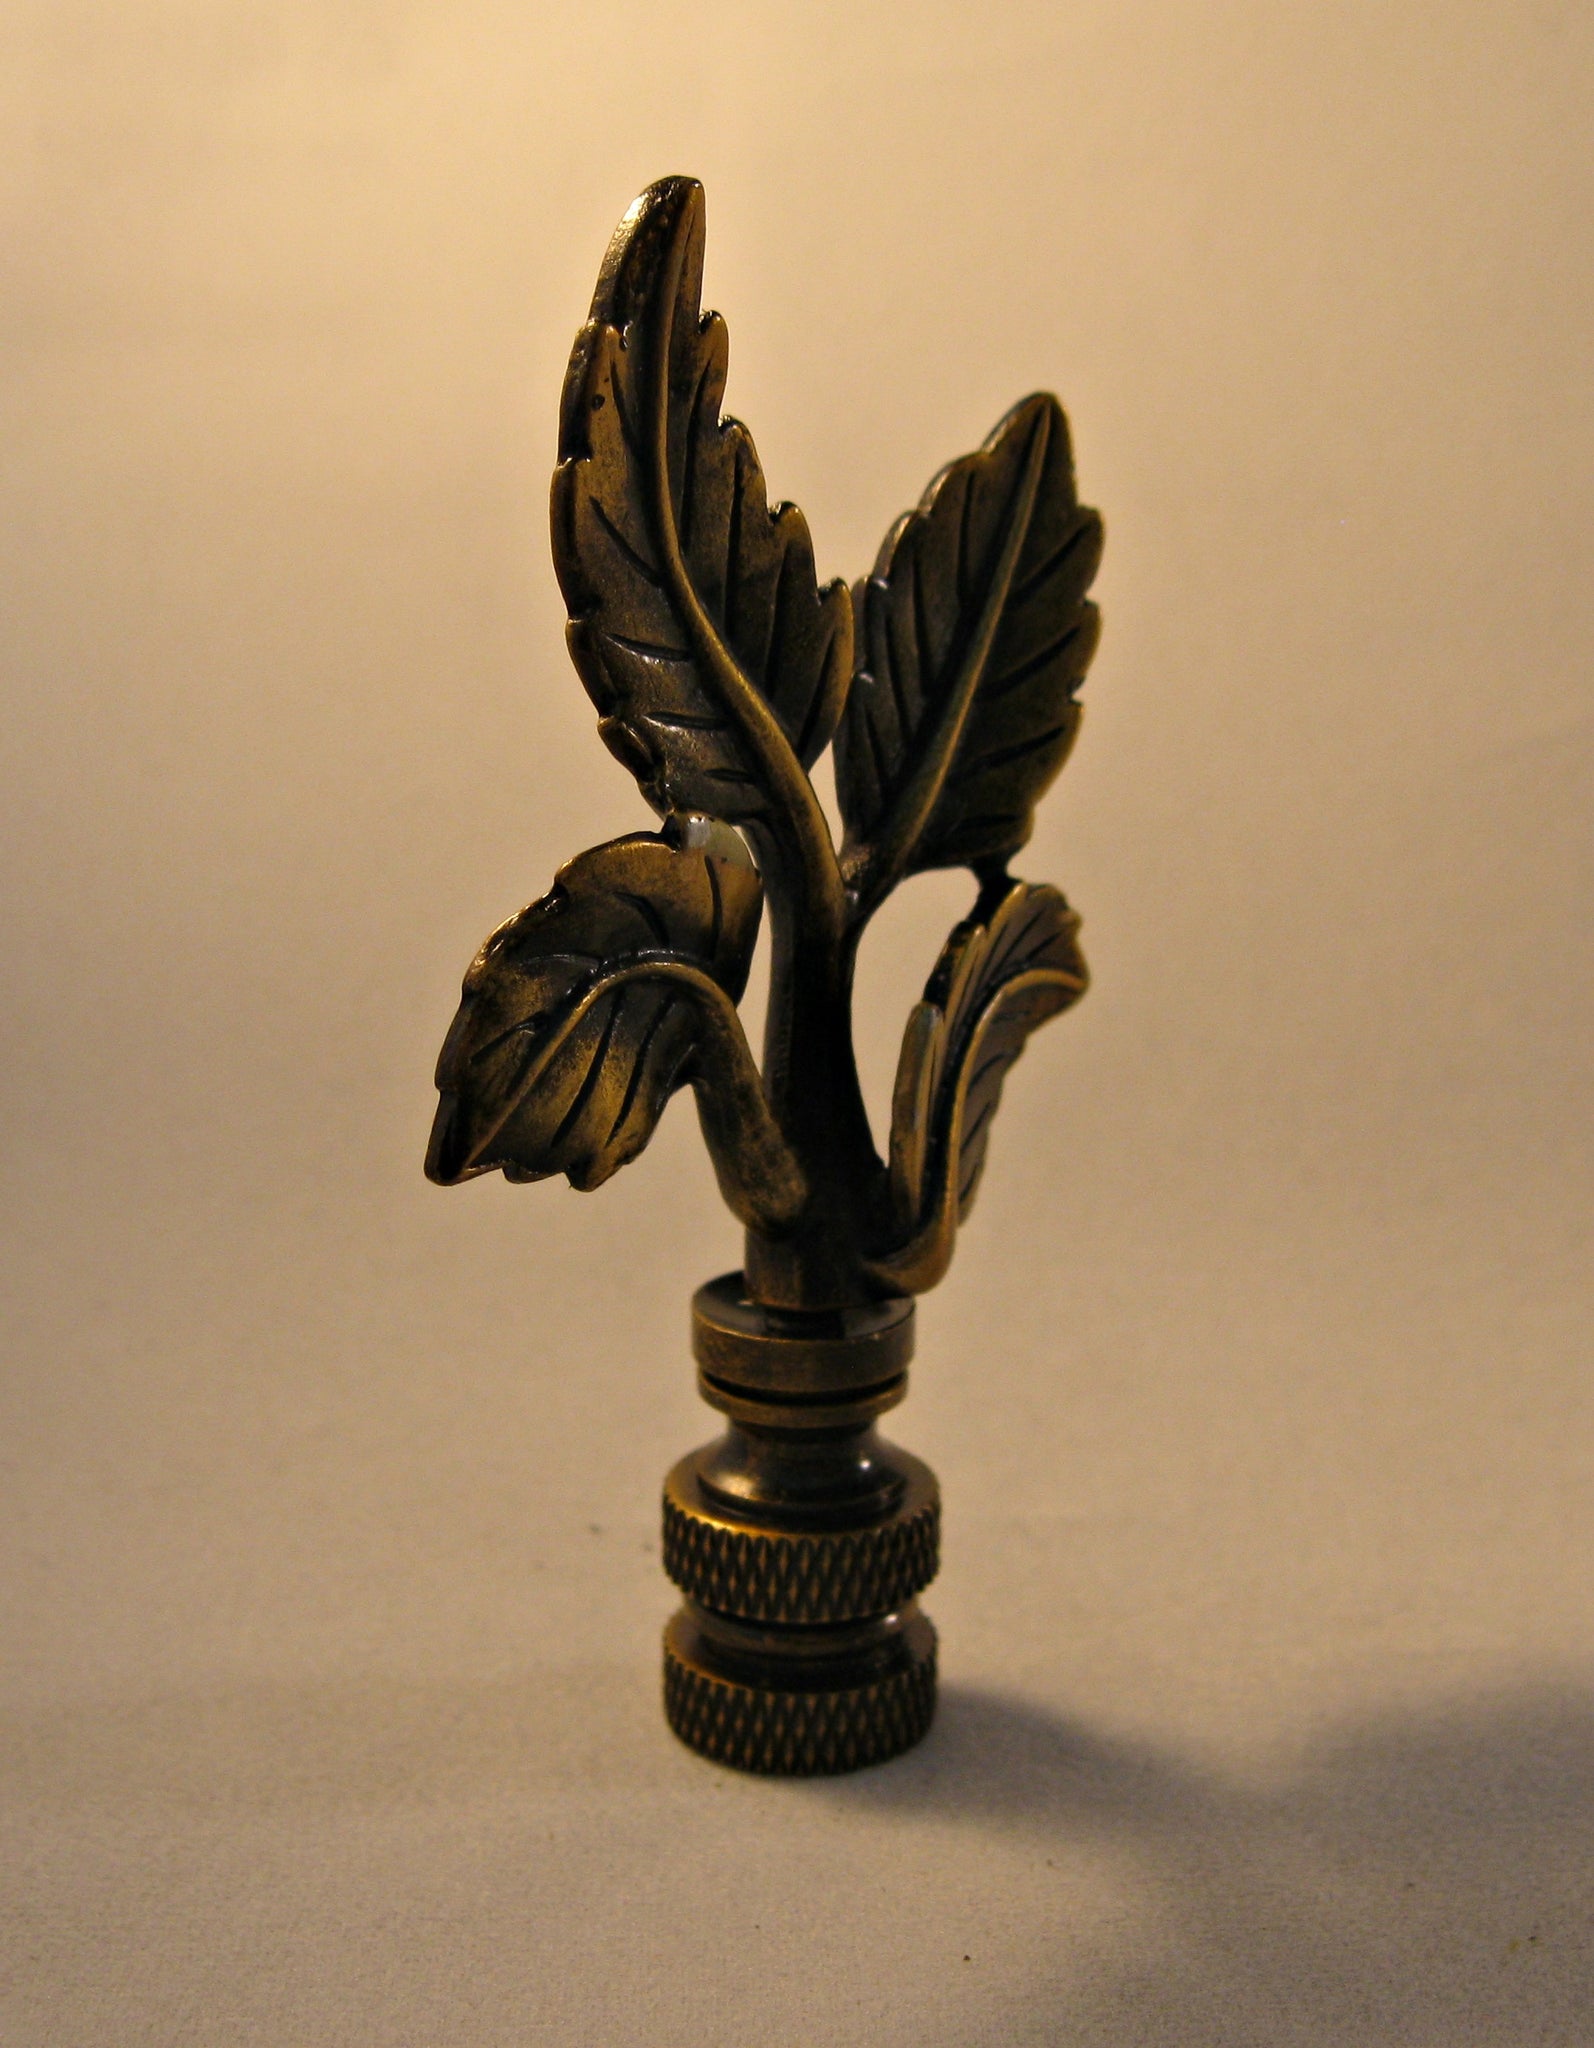 SPIRAL CONE Lamp Finial, Aged Brass Finish, Highly detailed metal